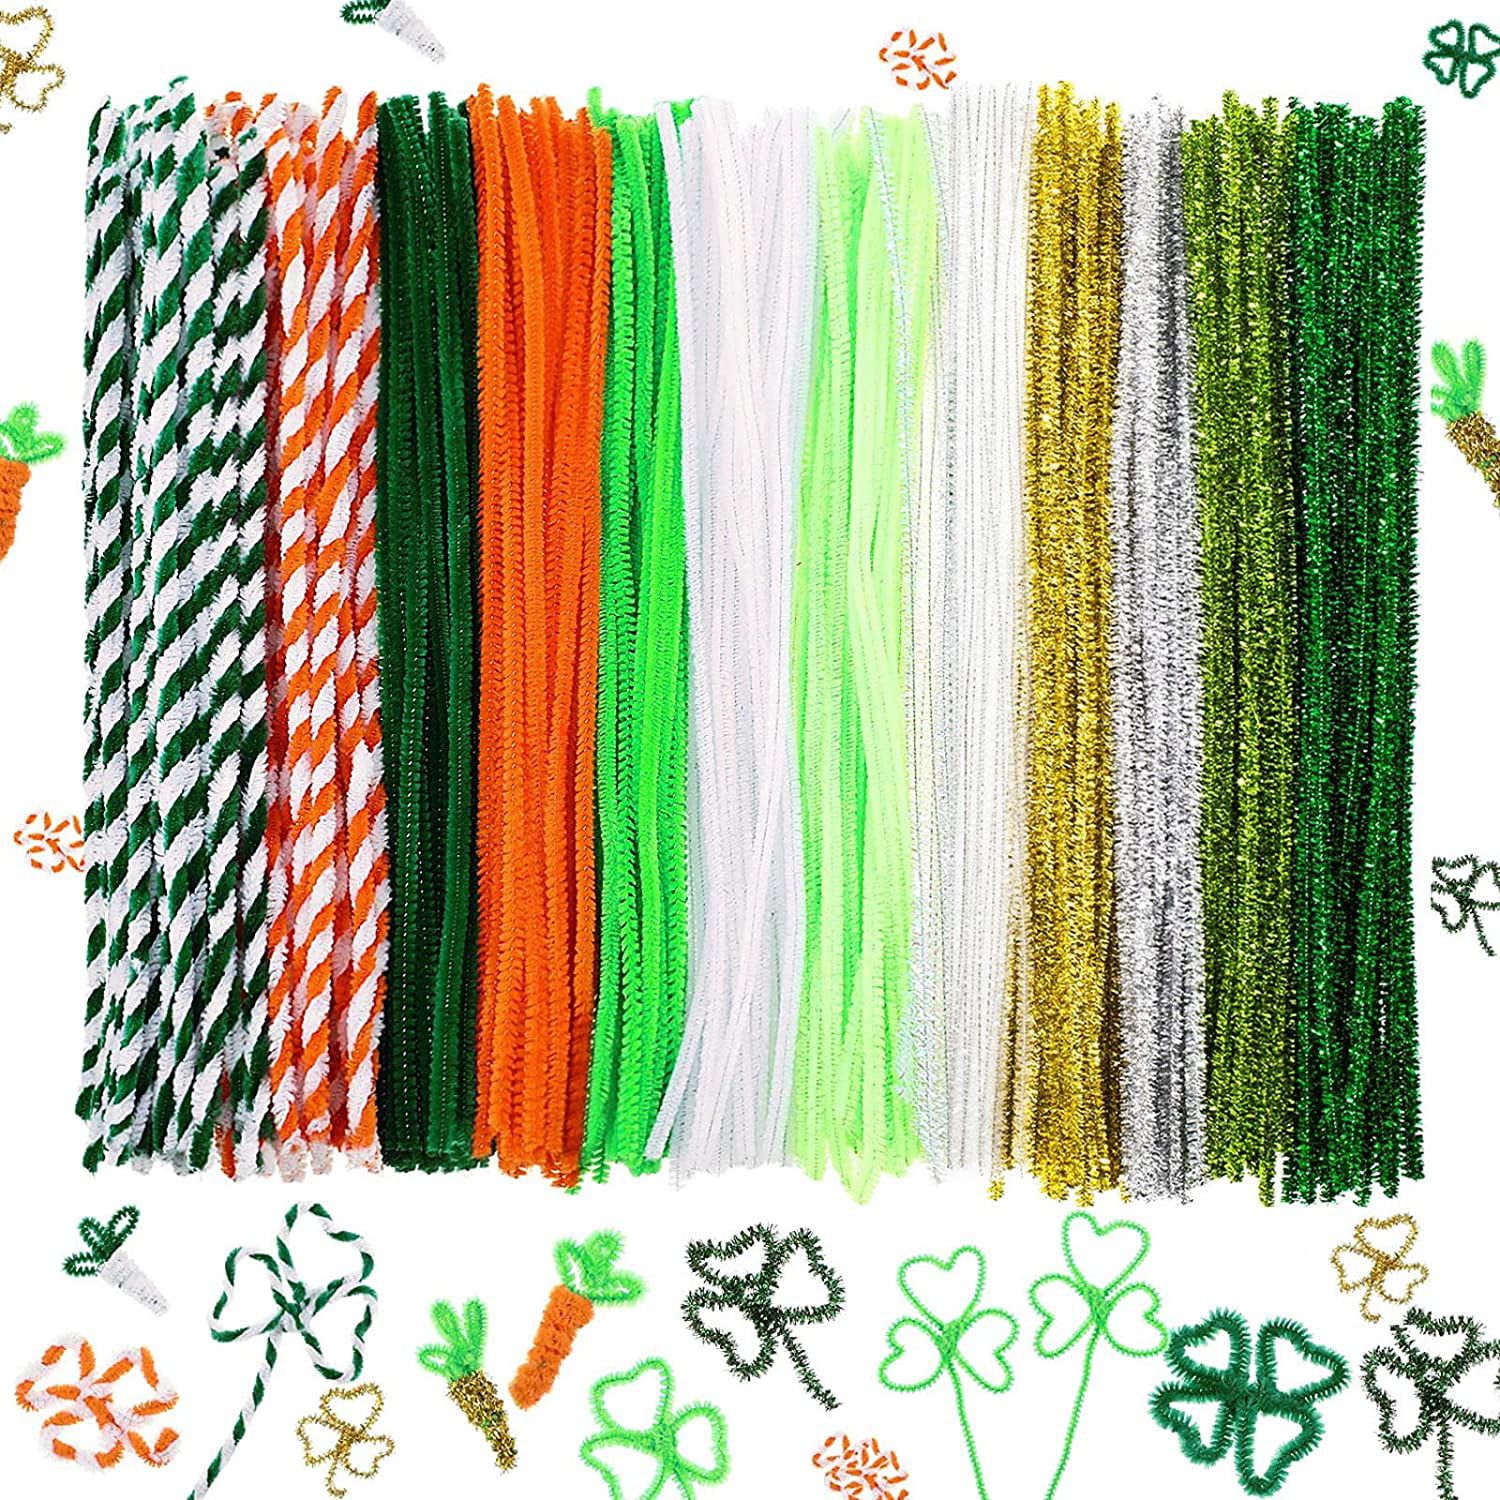 Crafts Decorations St. Patricks Day Colors Patricks Day Valentines Day DIY Craft Art Supplies 360 Pieces Pipe Cleaners Chenille Stem Green Pipe Cleaners Craft Chenille Stems for St 12 Colors 